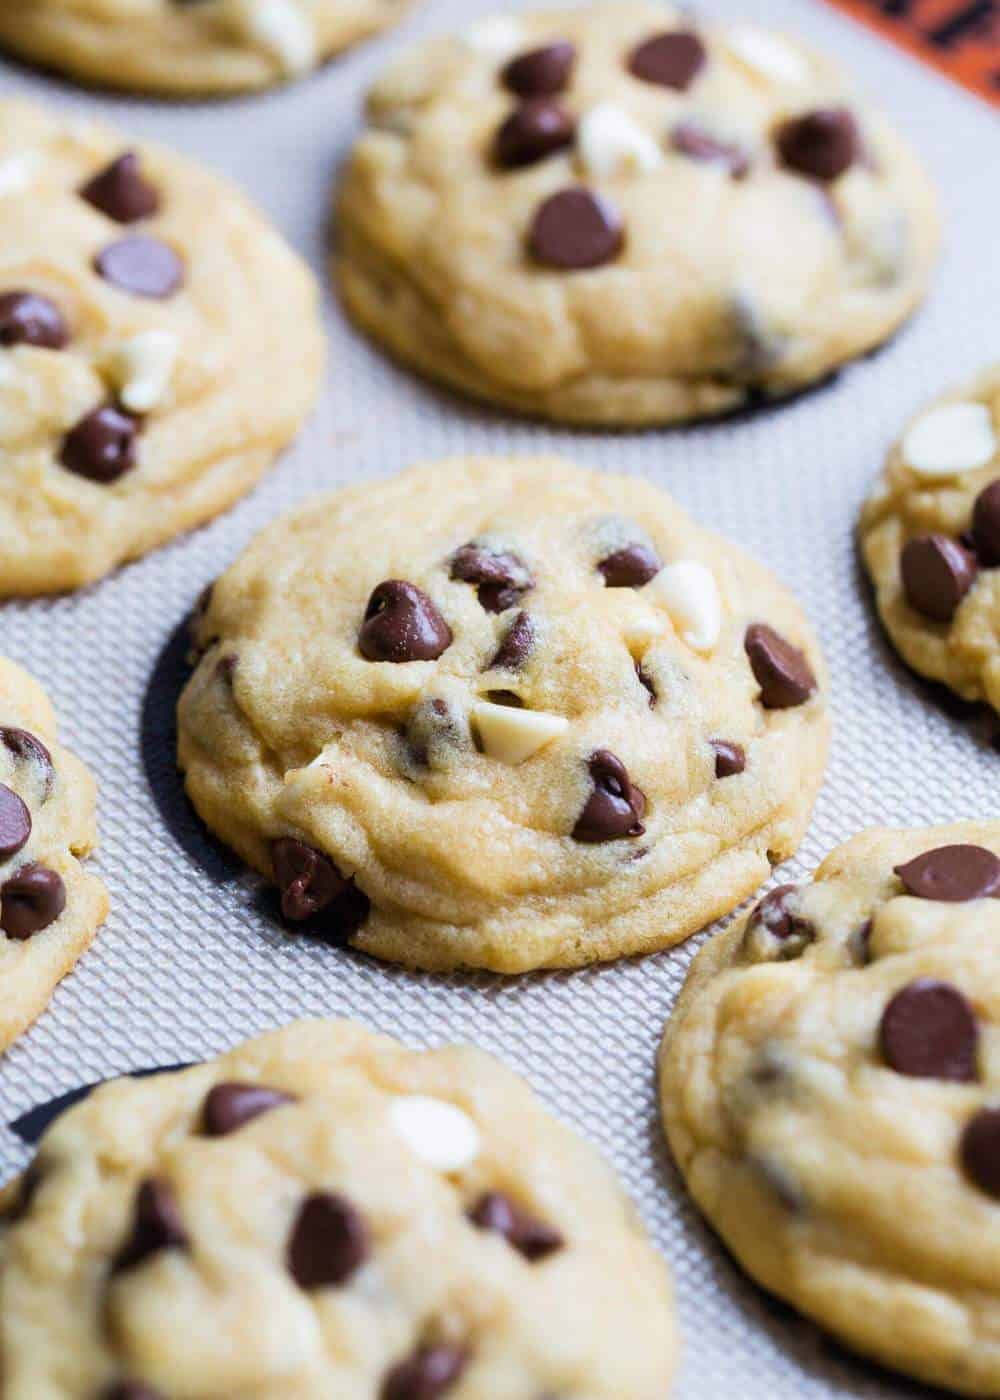 Chocolate chip pudding cookies on a Silpat mat.